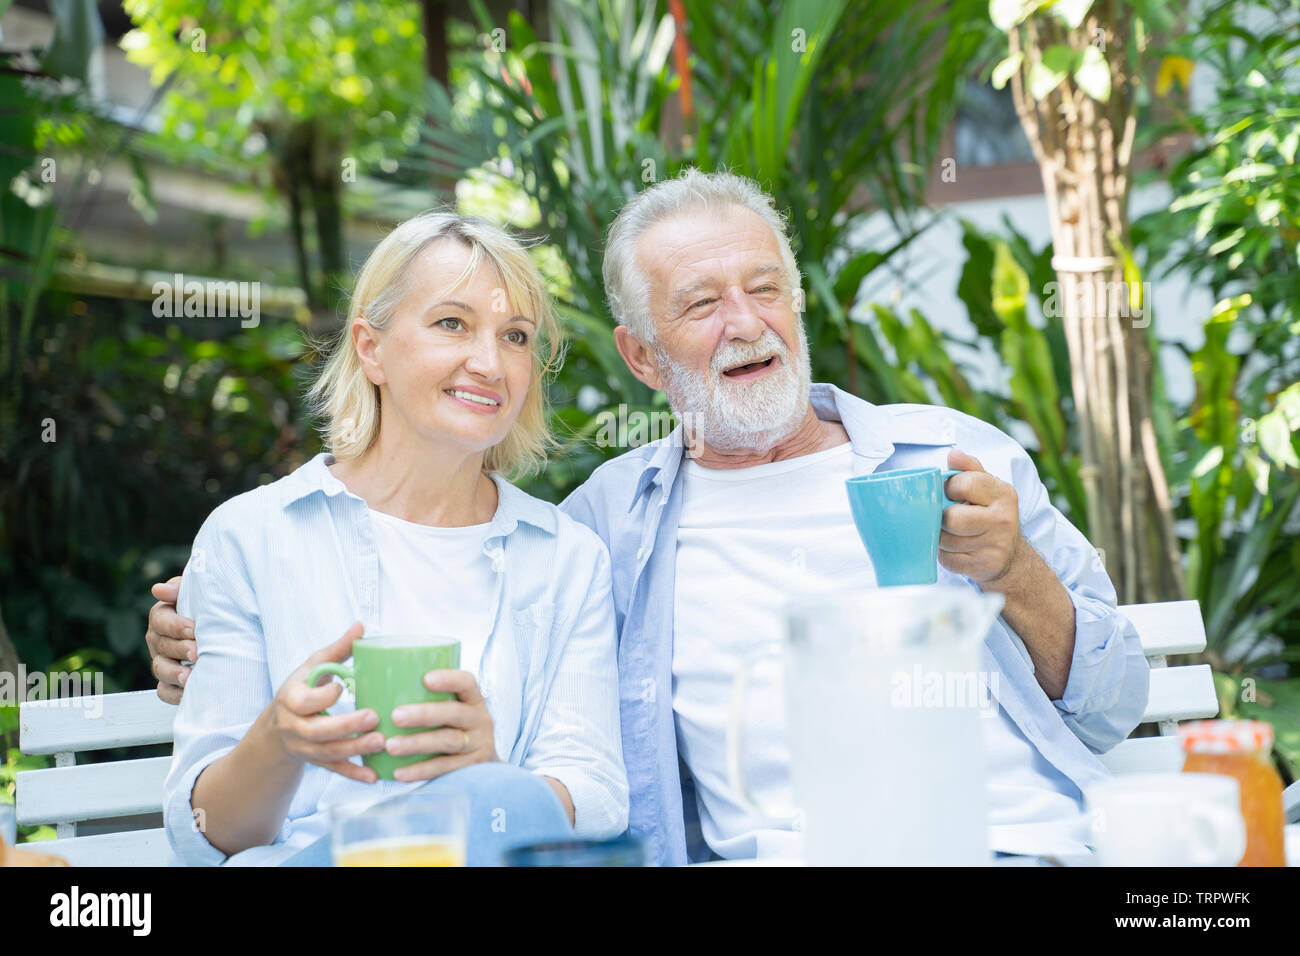 Happy moments. Joyful nice retirement age couple having tea and laughing while enjoying their time together - Image Stock Photo